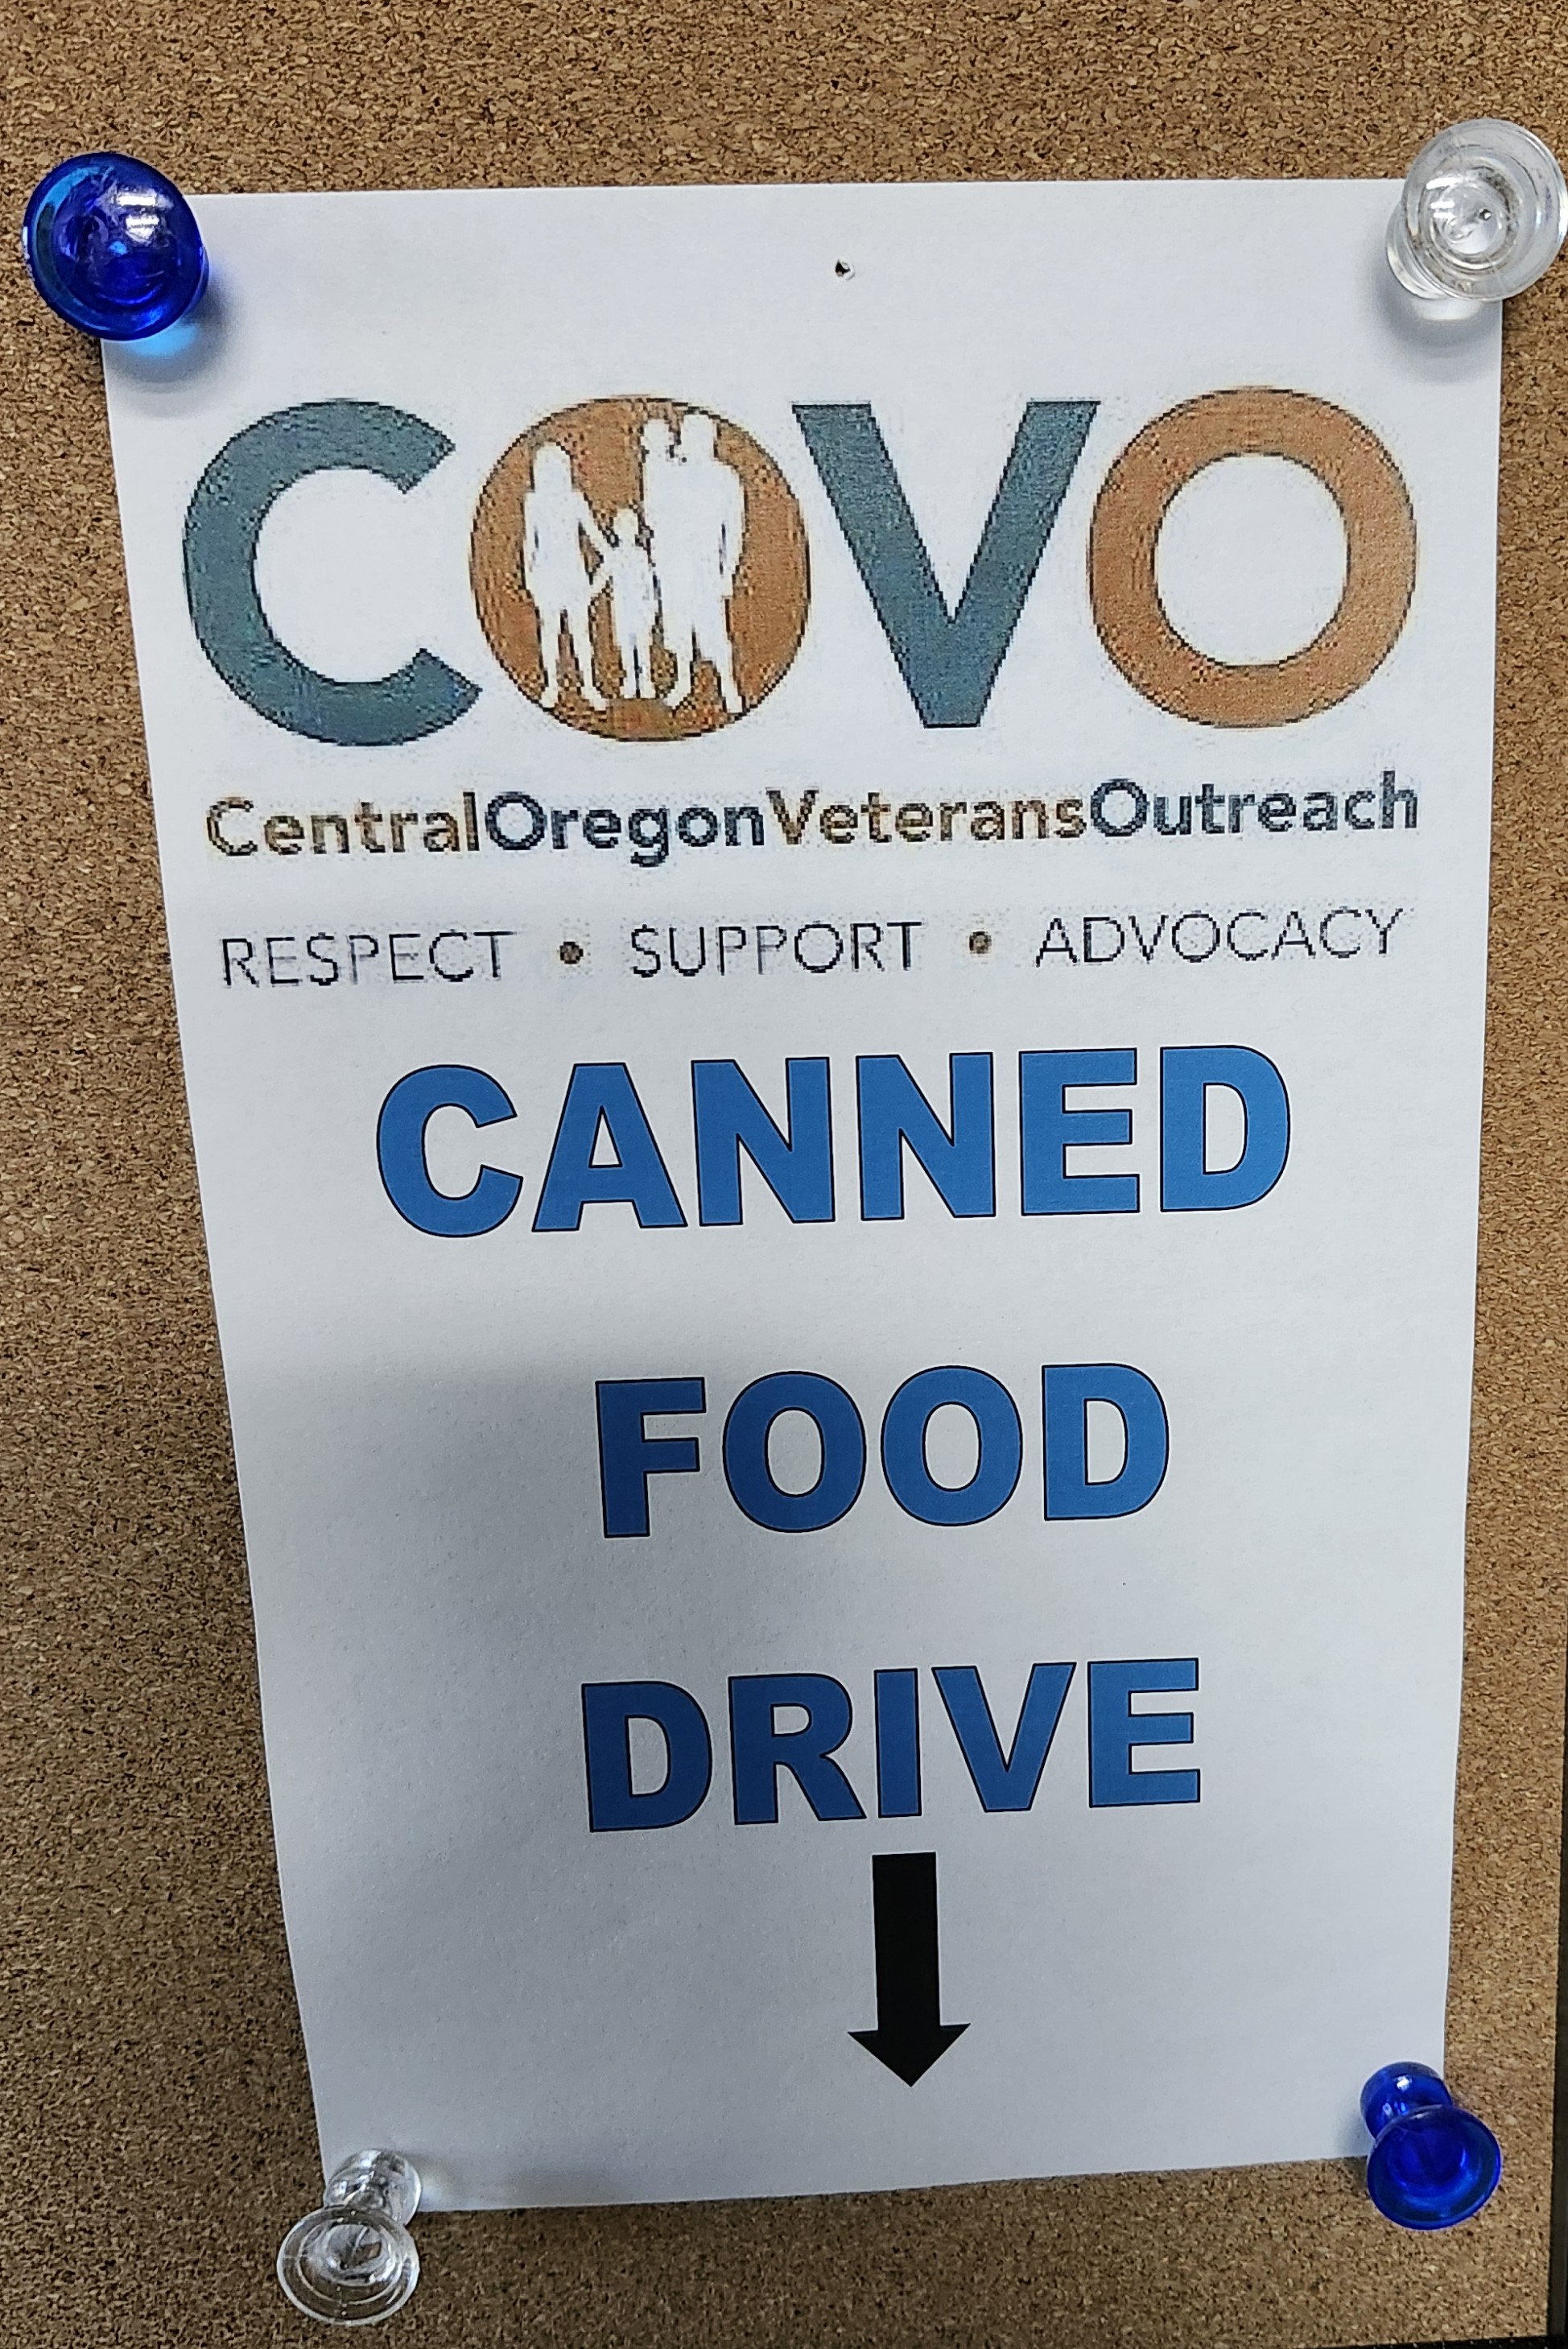 covo canned food drive